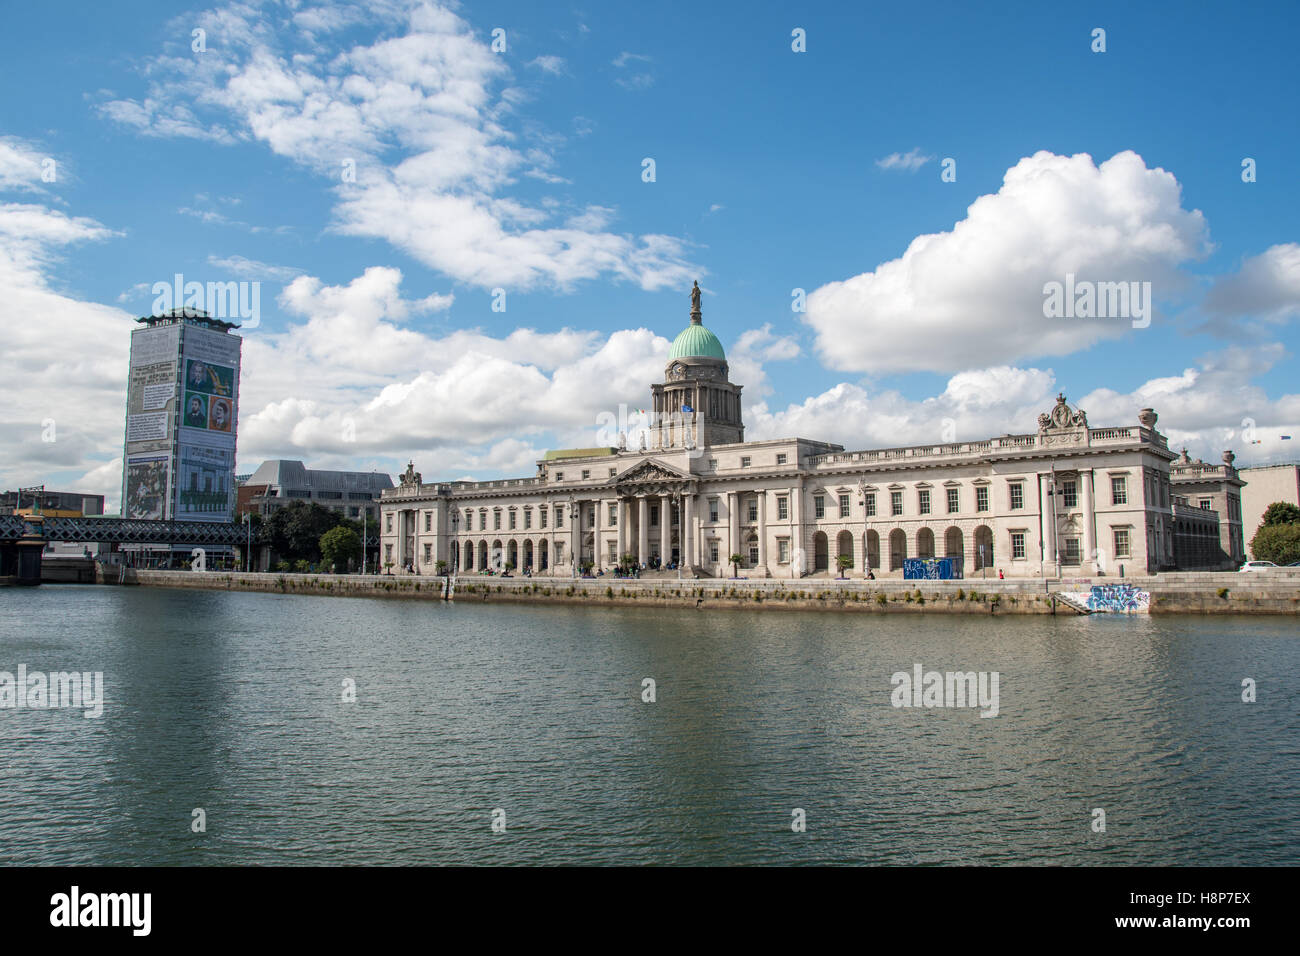 Dublin, Ireland- The Custom House, neoclassical 18th-century building in Dublin, Ireland which houses the Department of Housing. Stock Photo